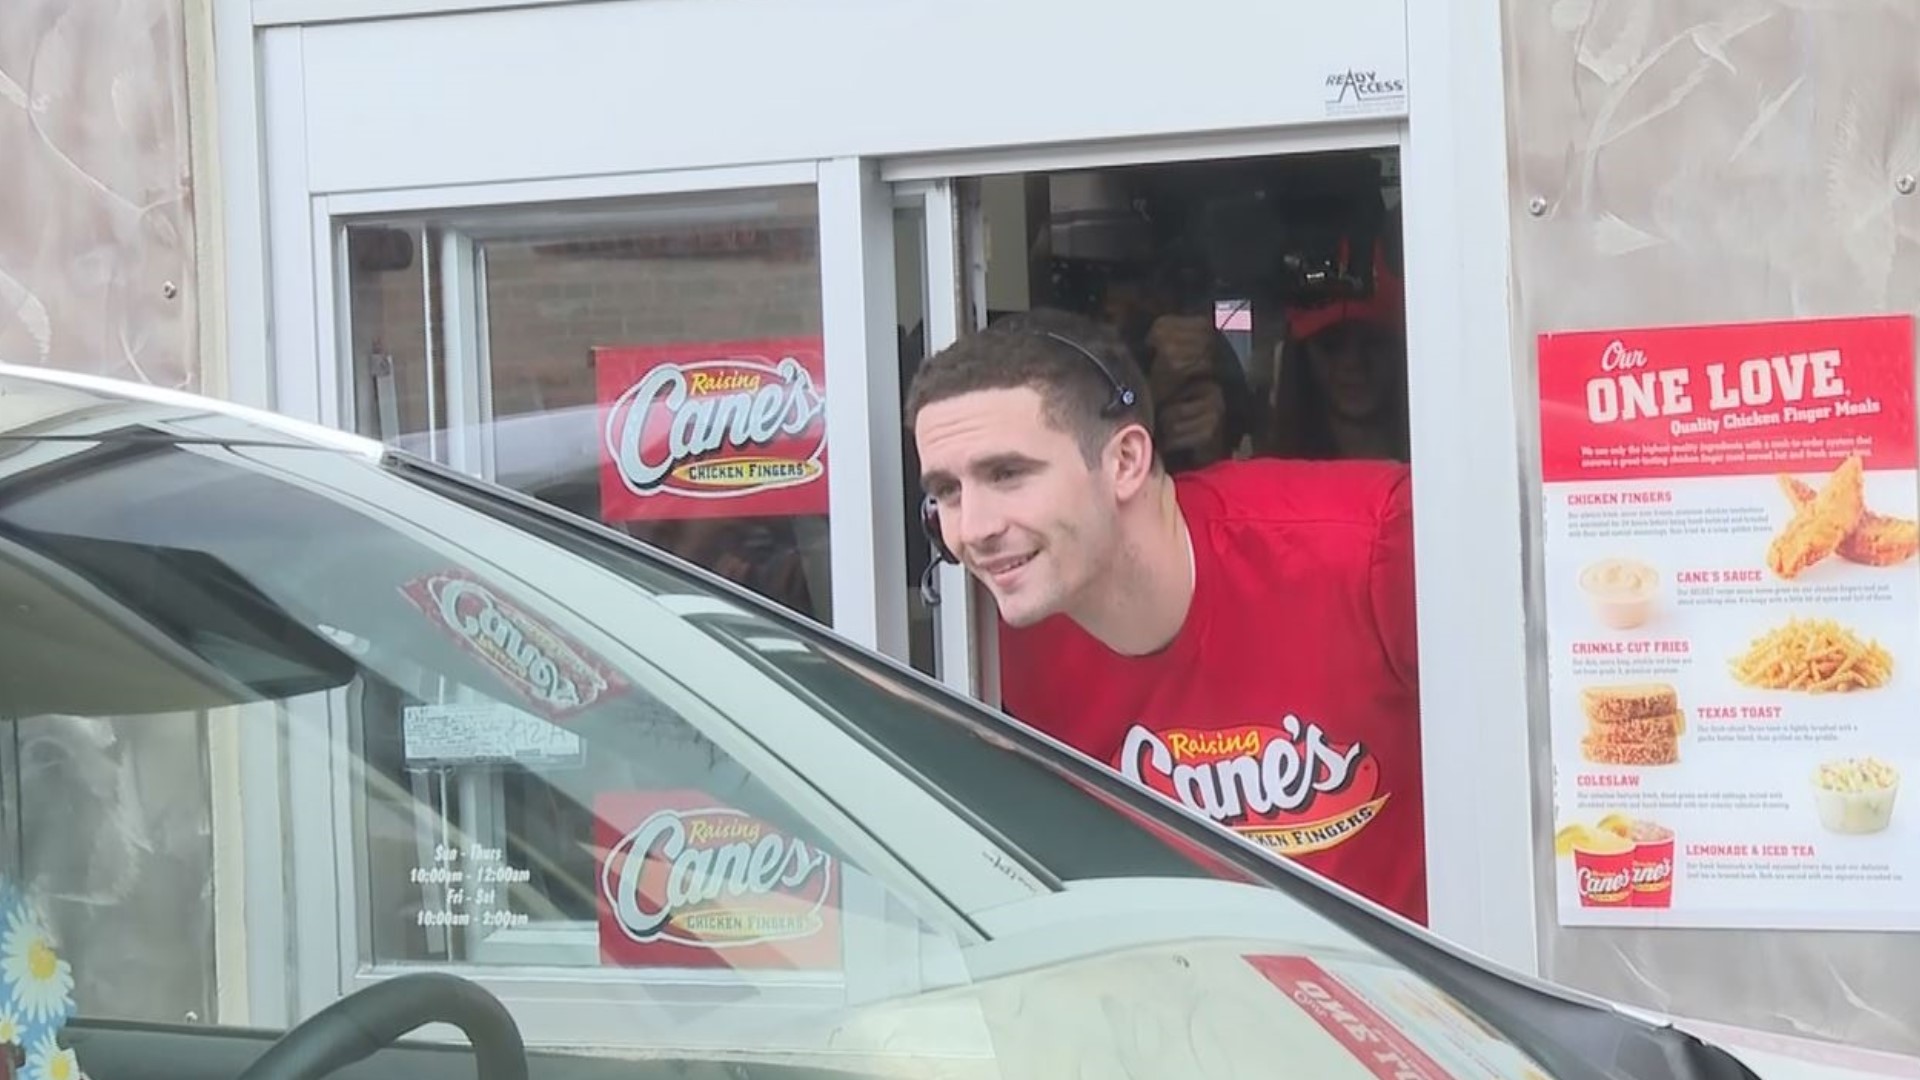 Stetson Bennett celebrated his National Championship Game win with the Georgia Bulldogs by moonlighting at Raising Cane's on Thursday.